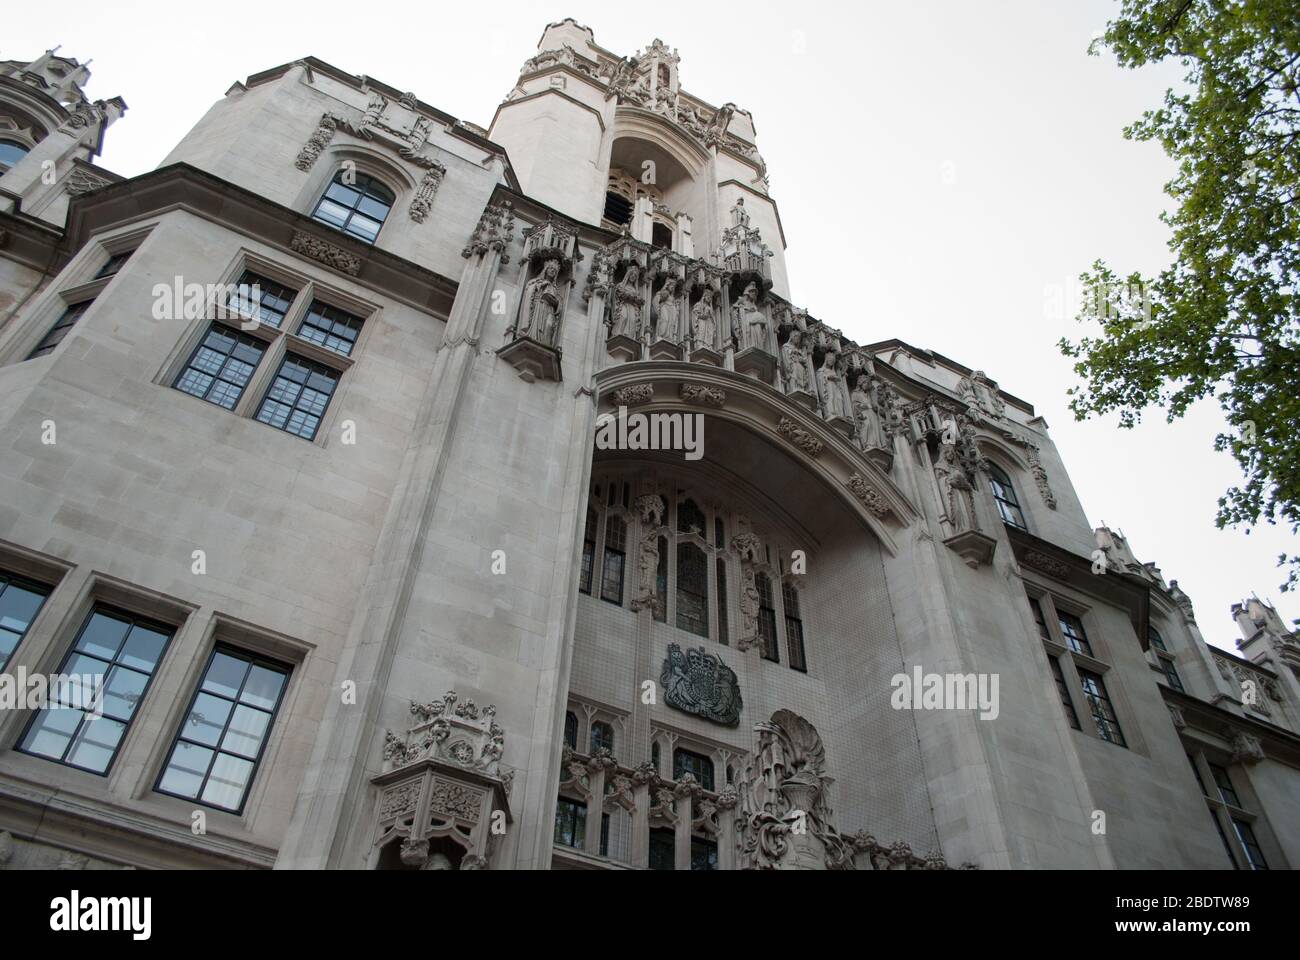 Stone Portland Stone Neo Gothic Architecture The Supreme Court, Little George St, Westminster, London SW1P 3BD by James Gibson Foto Stock